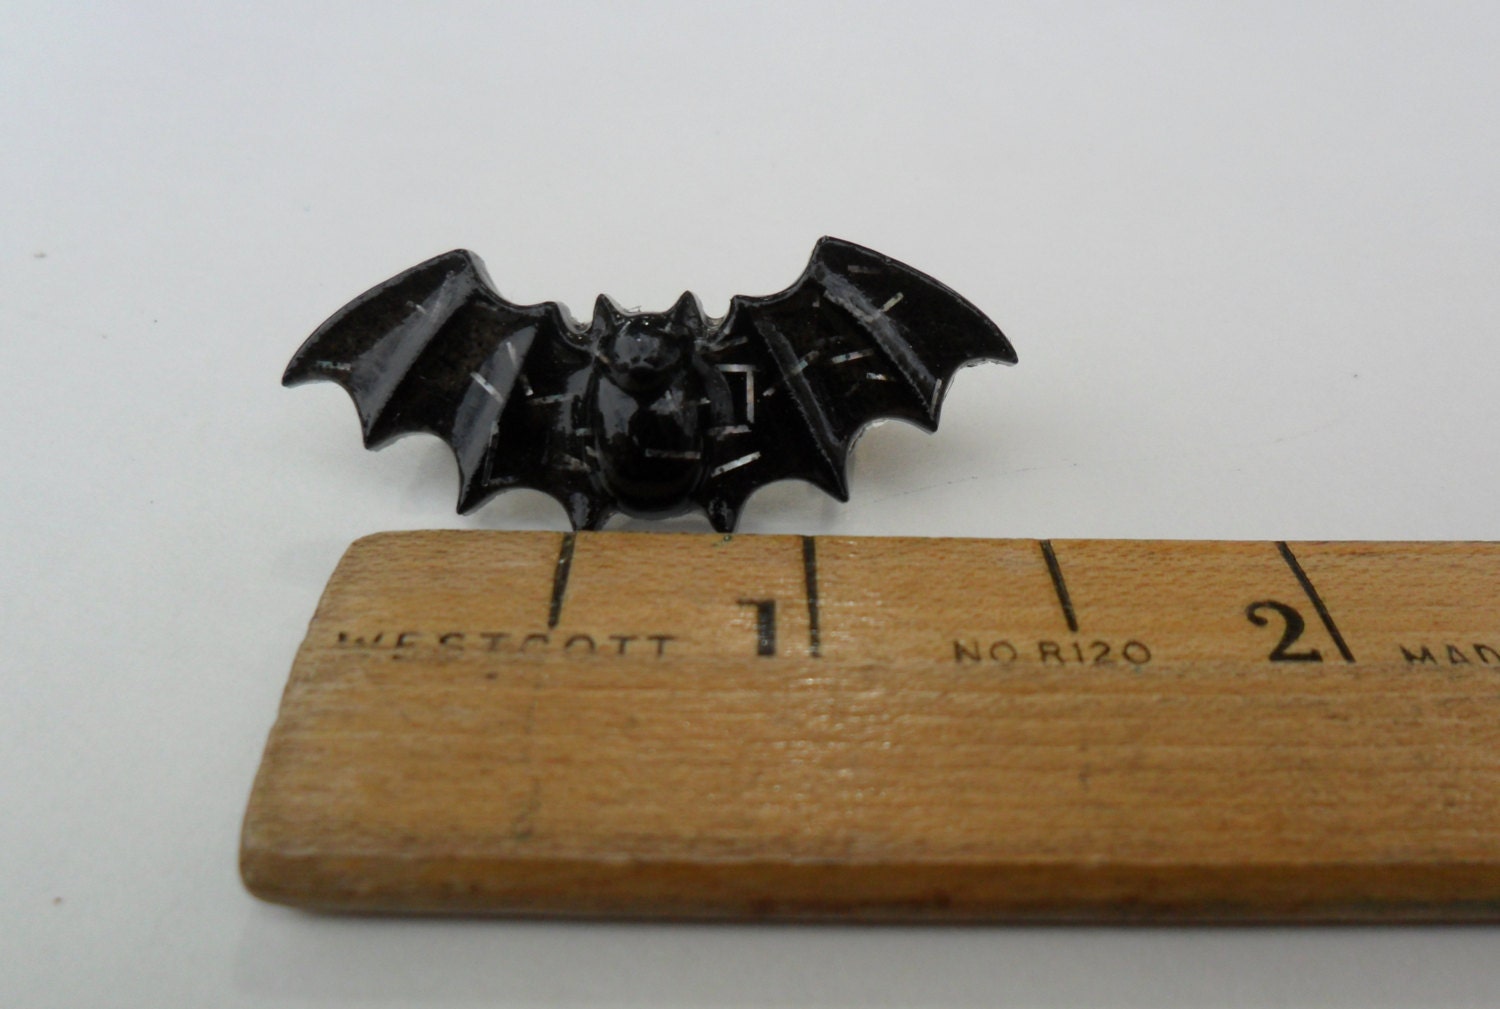 Small bat pin by BootifulBaubles on Etsy